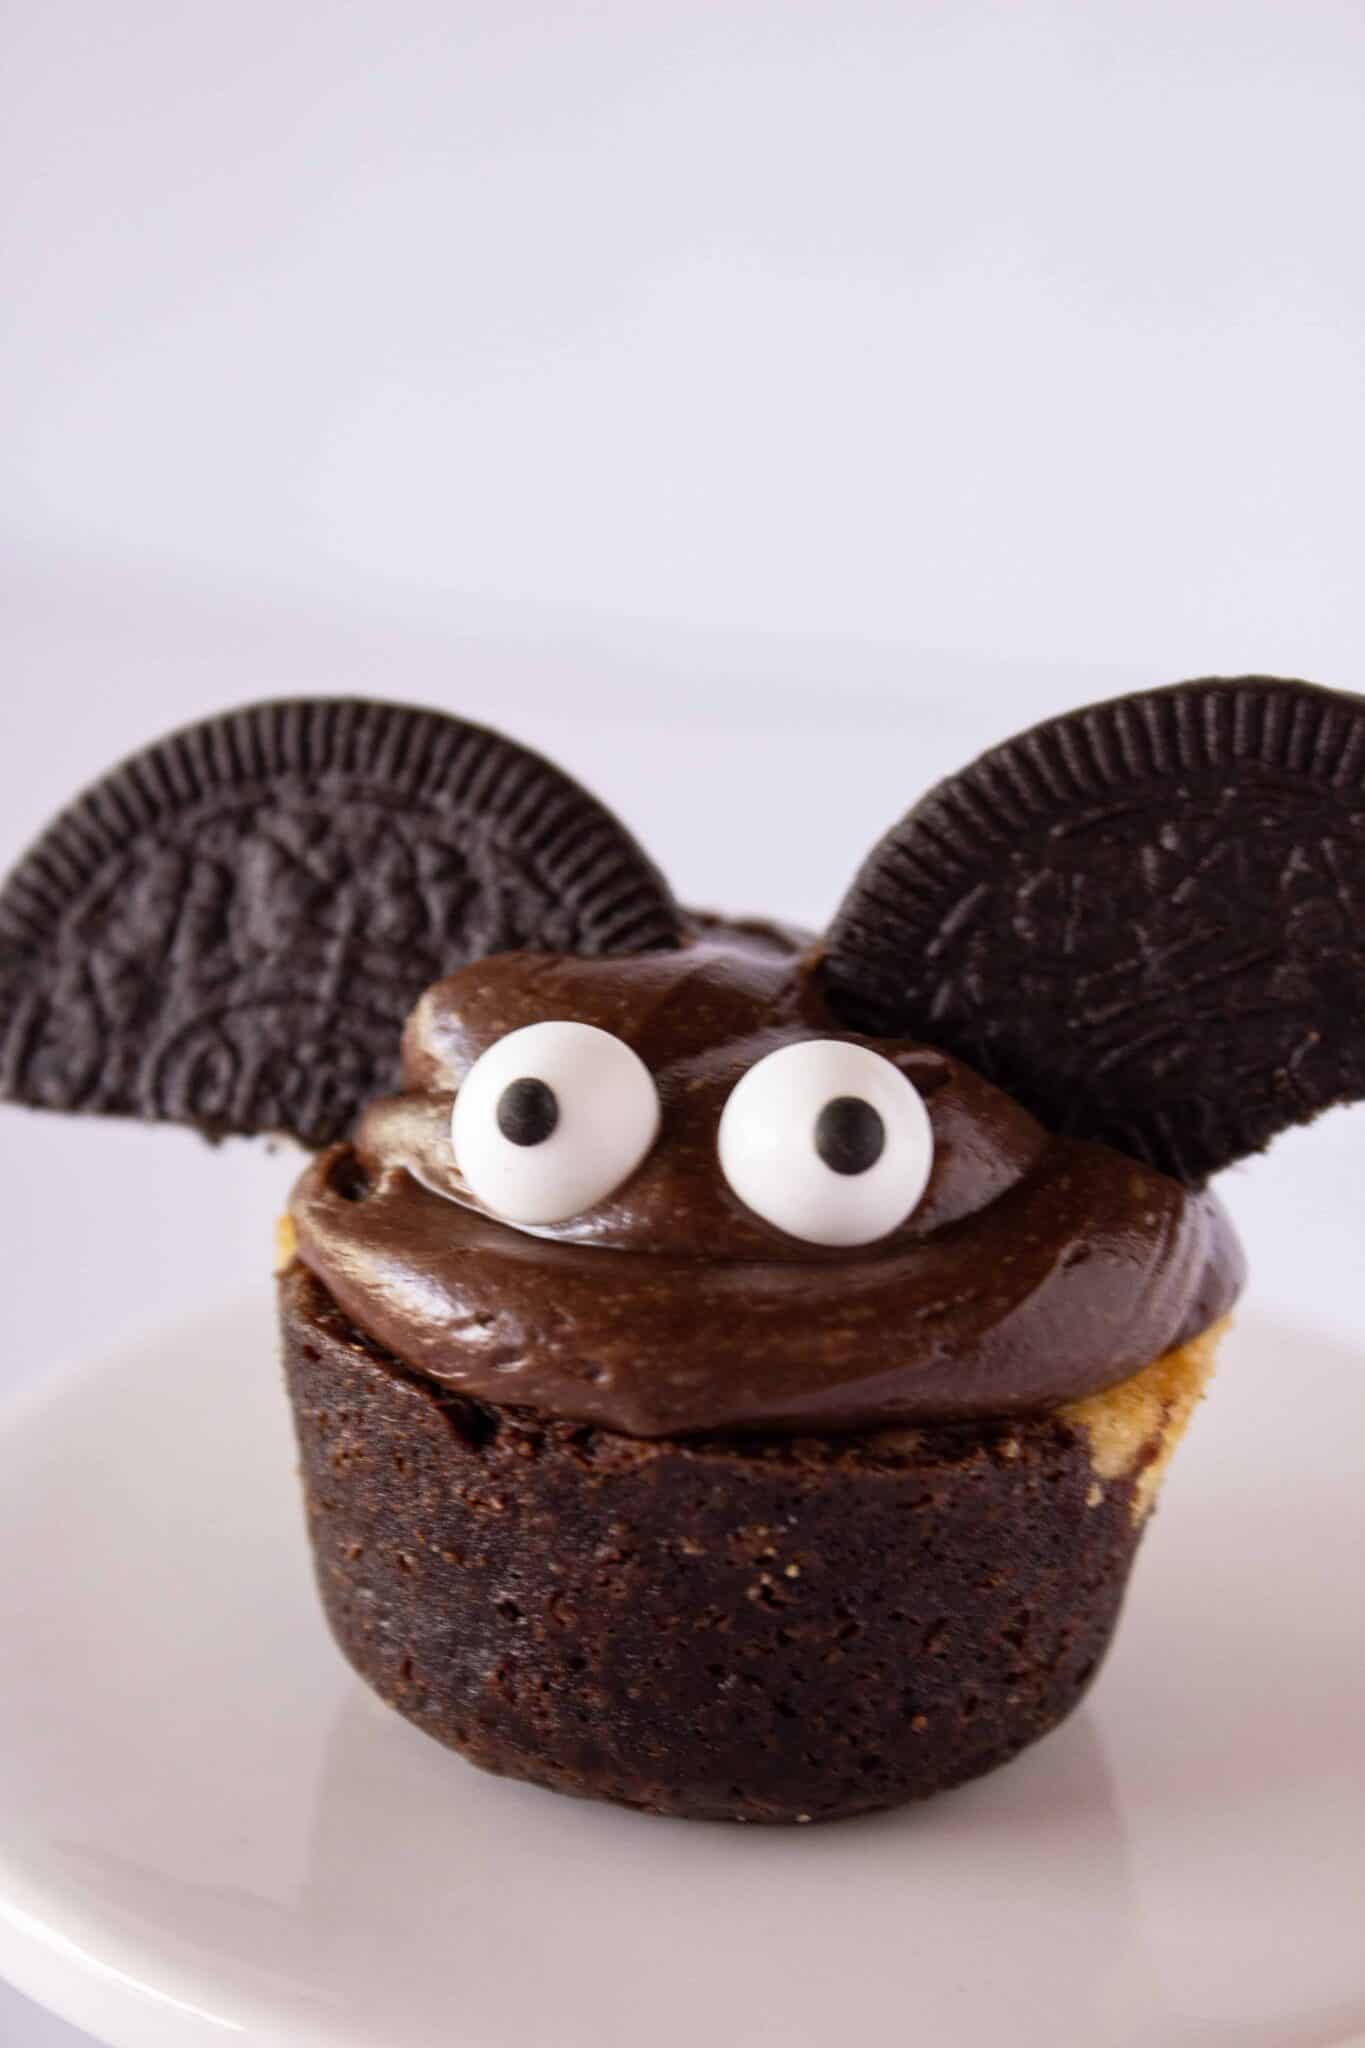 Spooky Brownie Bats Bites Recipe featured by top US dessert blogger, Practically Homemade